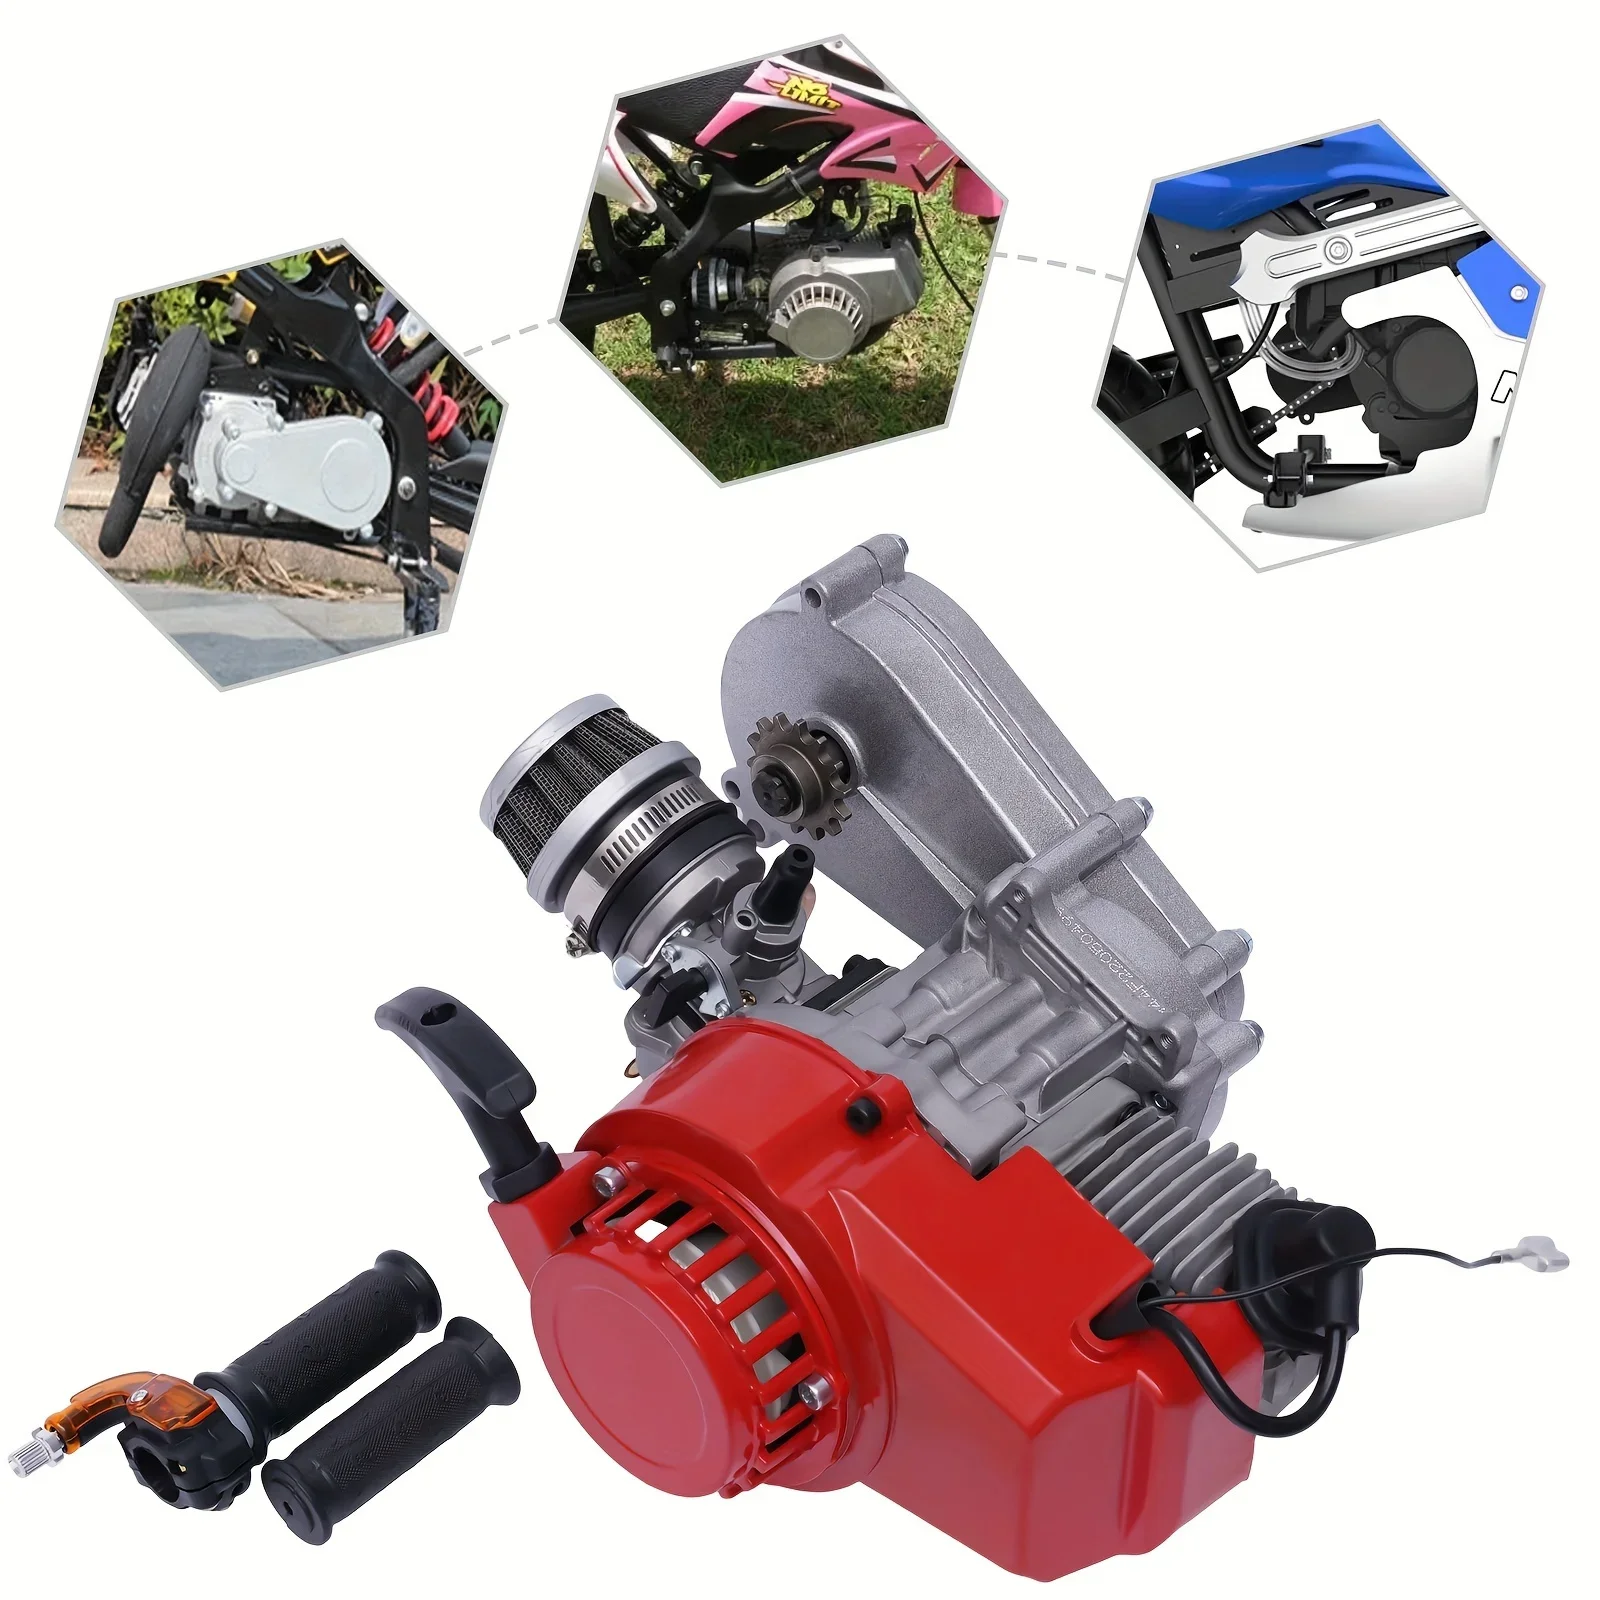 

Powerful 2-Stroke 49cc 50cc Pull Start Engine Ideal for Mini Motor Pocket Scooter Dirt Bike Riding Excitement